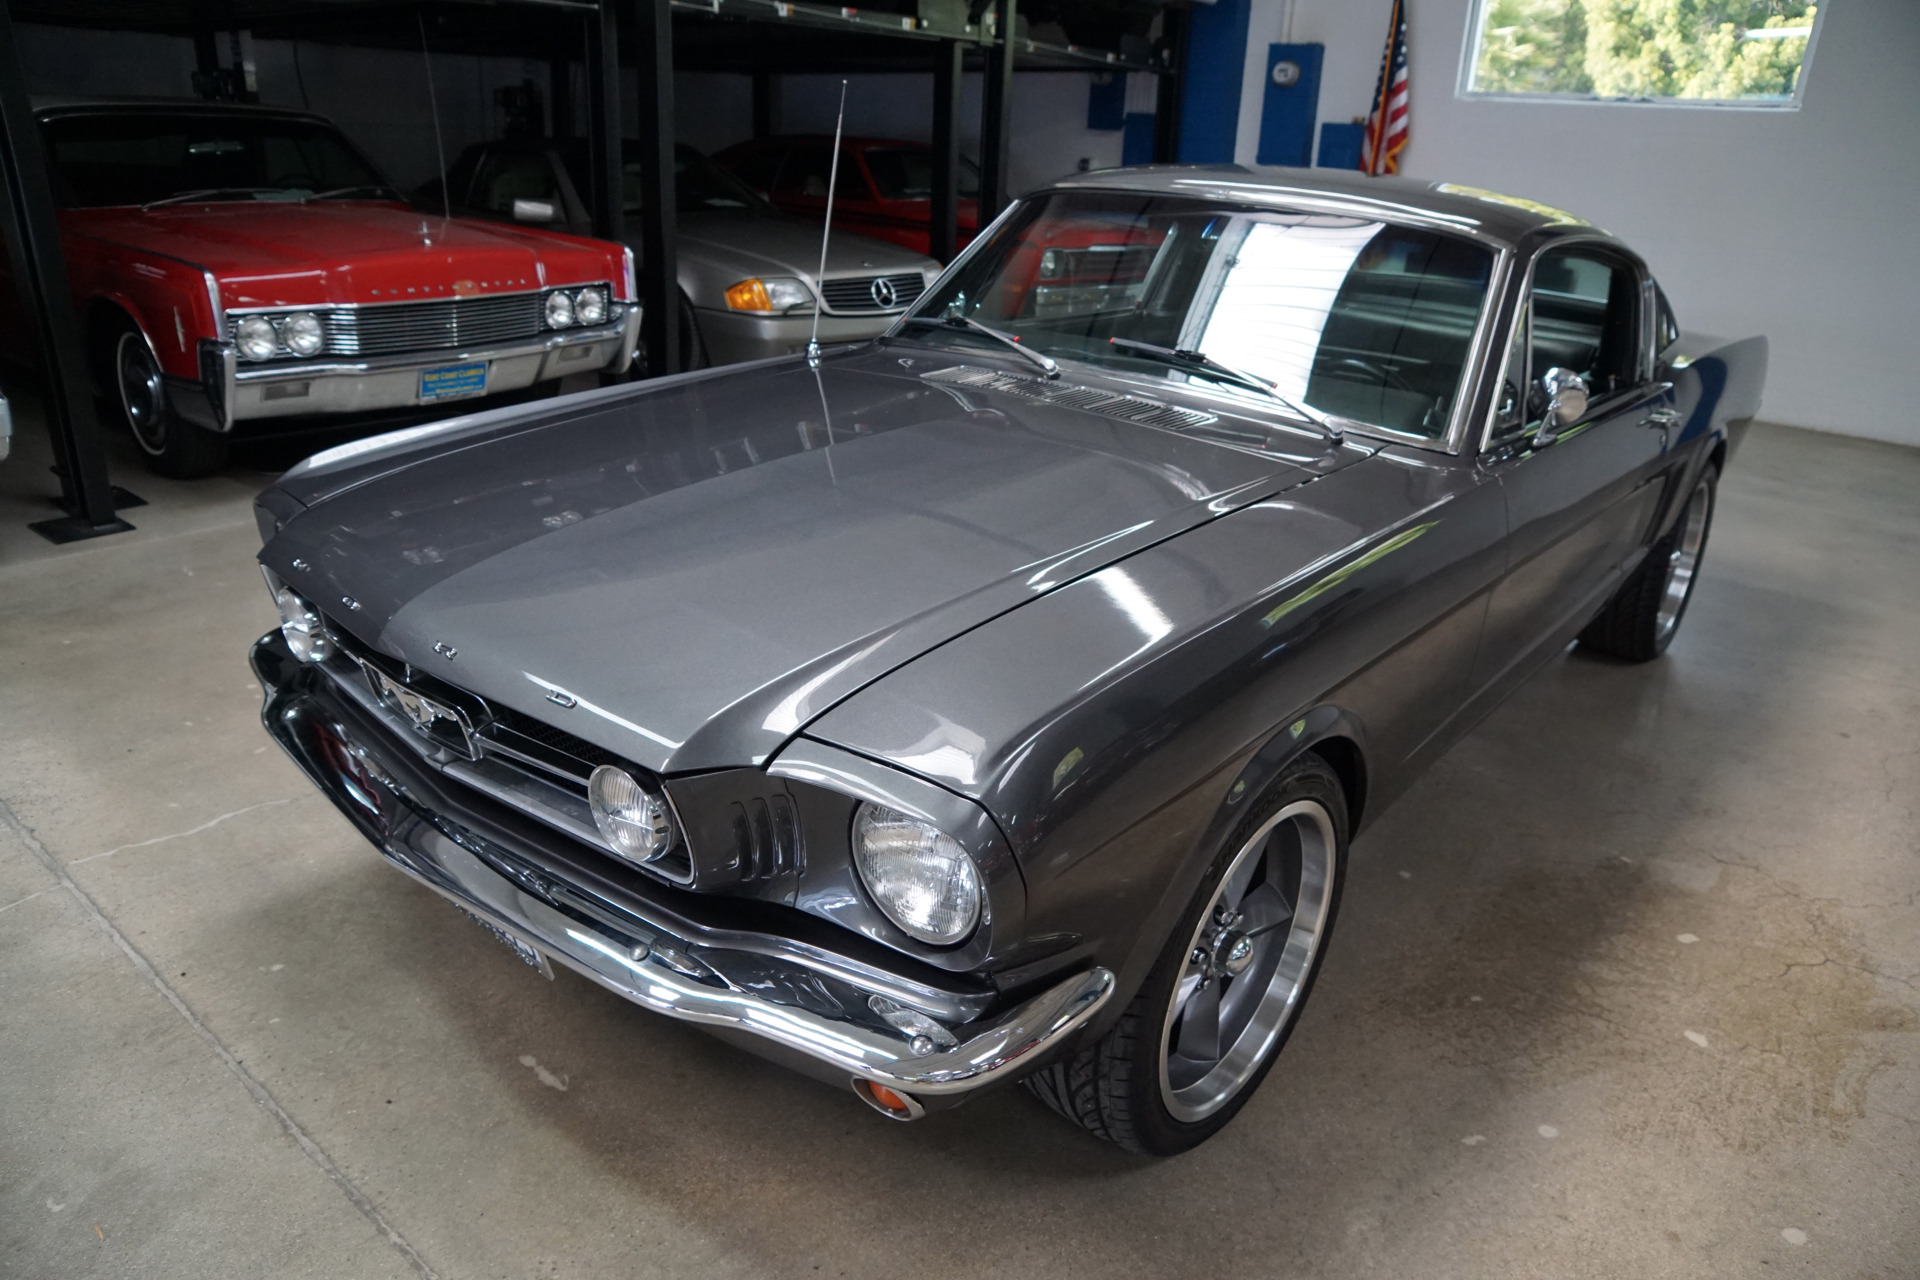 1965 Ford Mustang Fastback Stock # 761 for sale near Torrance, CA